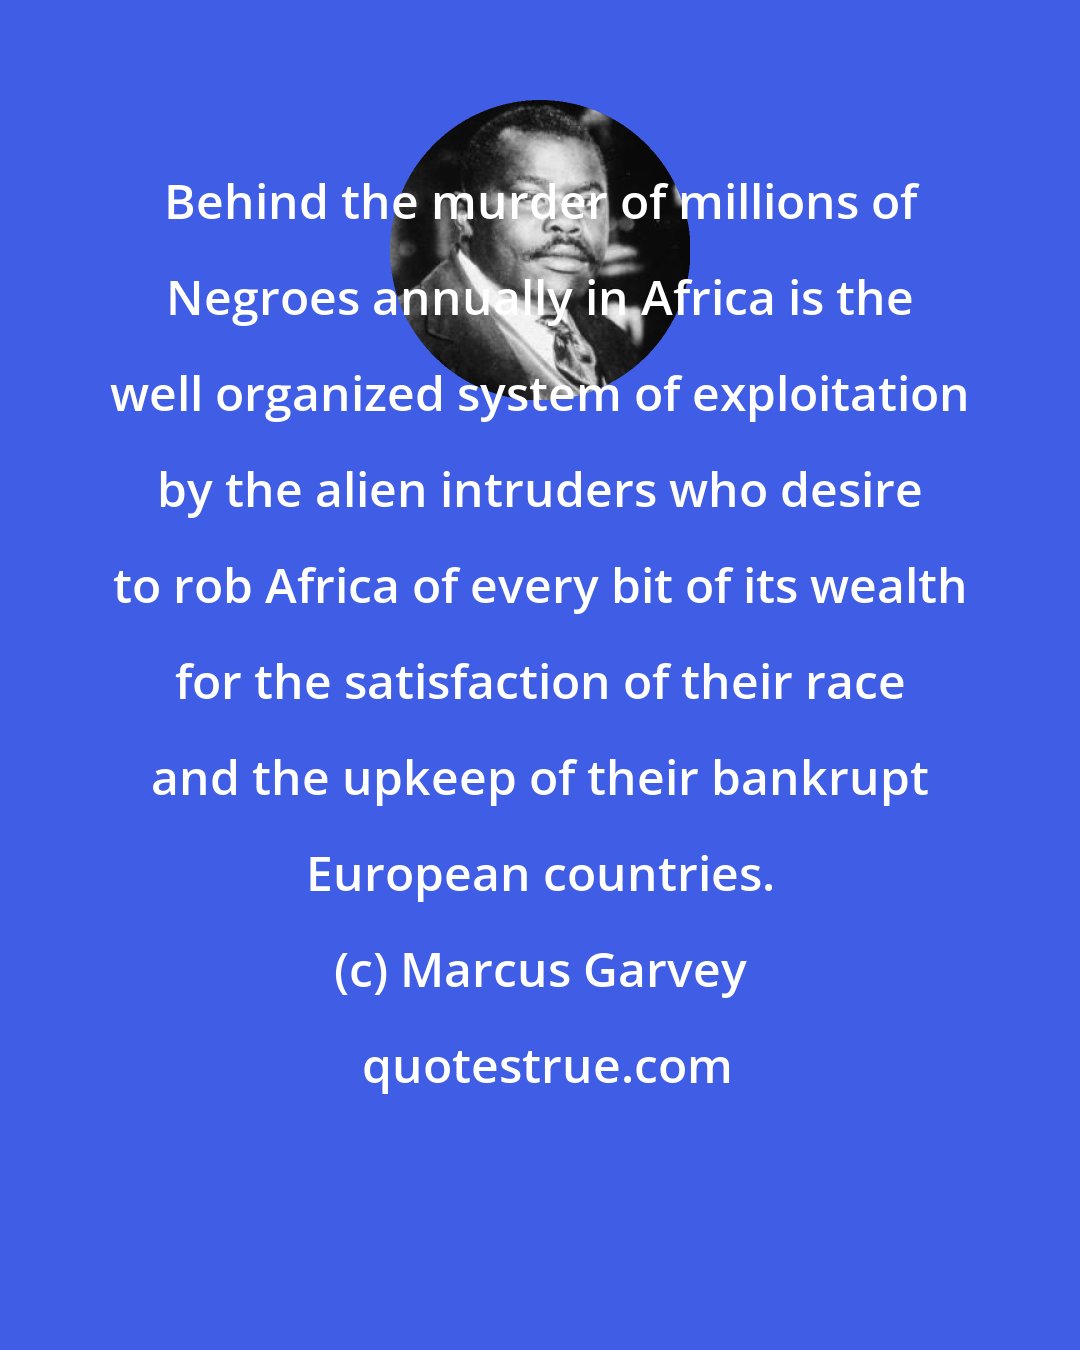 Marcus Garvey: Behind the murder of millions of Negroes annually in Africa is the well organized system of exploitation by the alien intruders who desire to rob Africa of every bit of its wealth for the satisfaction of their race and the upkeep of their bankrupt European countries.